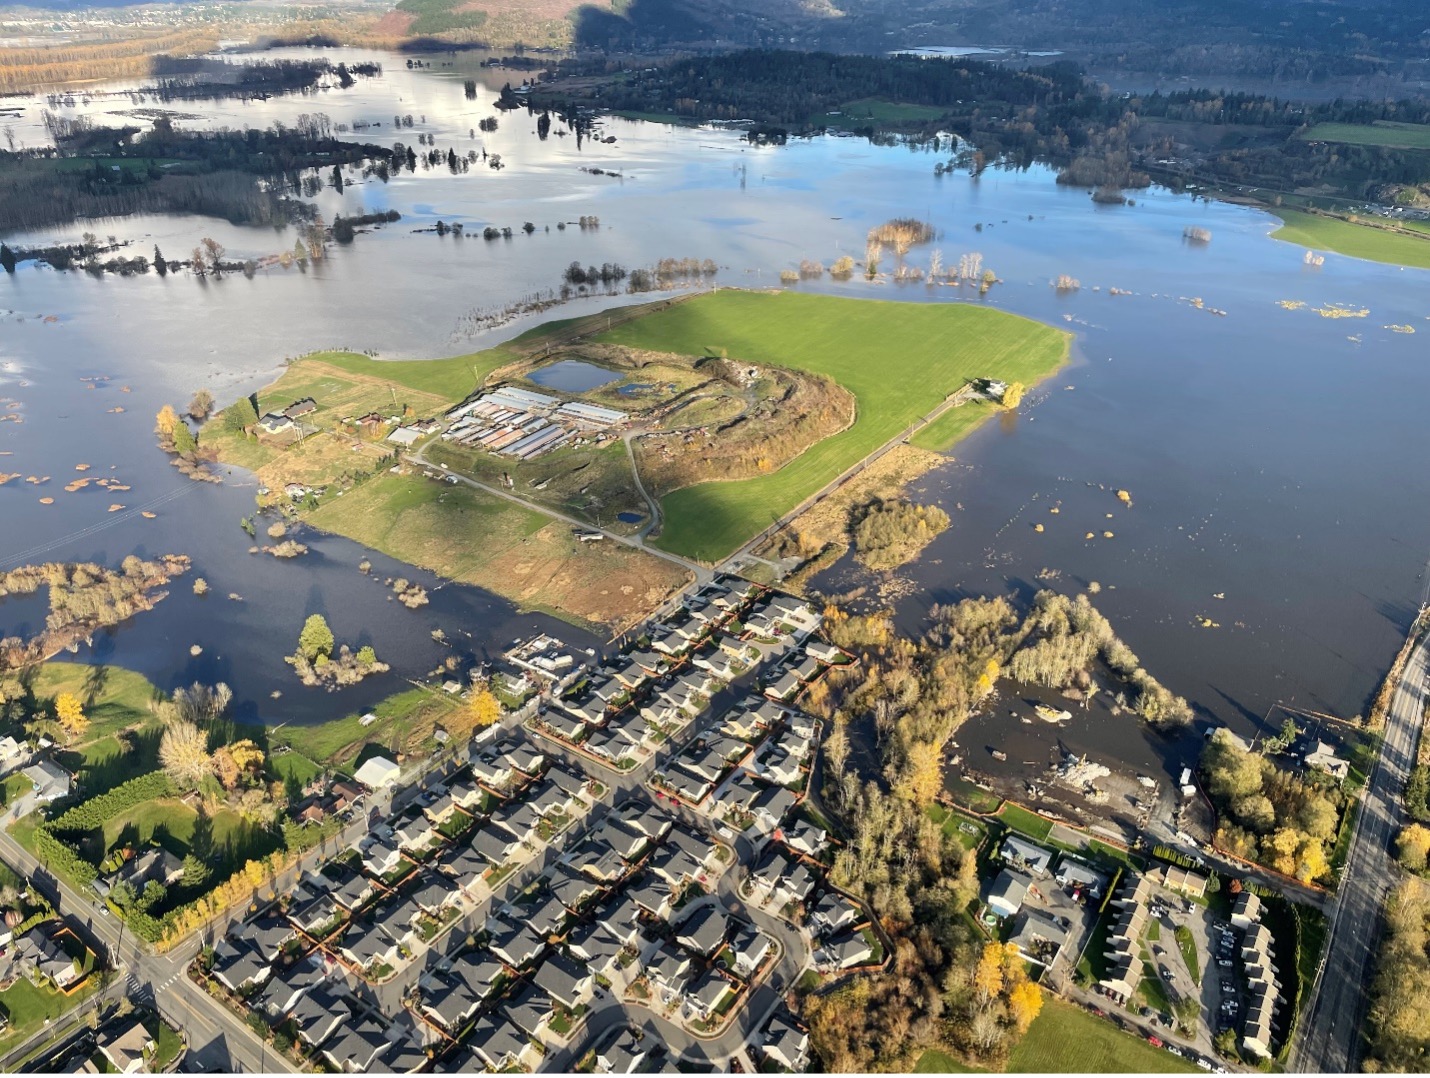 New development under construction in the Skagit shown during flooding on November 16, 2021. Photo Credit: Brandon Parsons, American Rivers with aerial support by LightHawk.